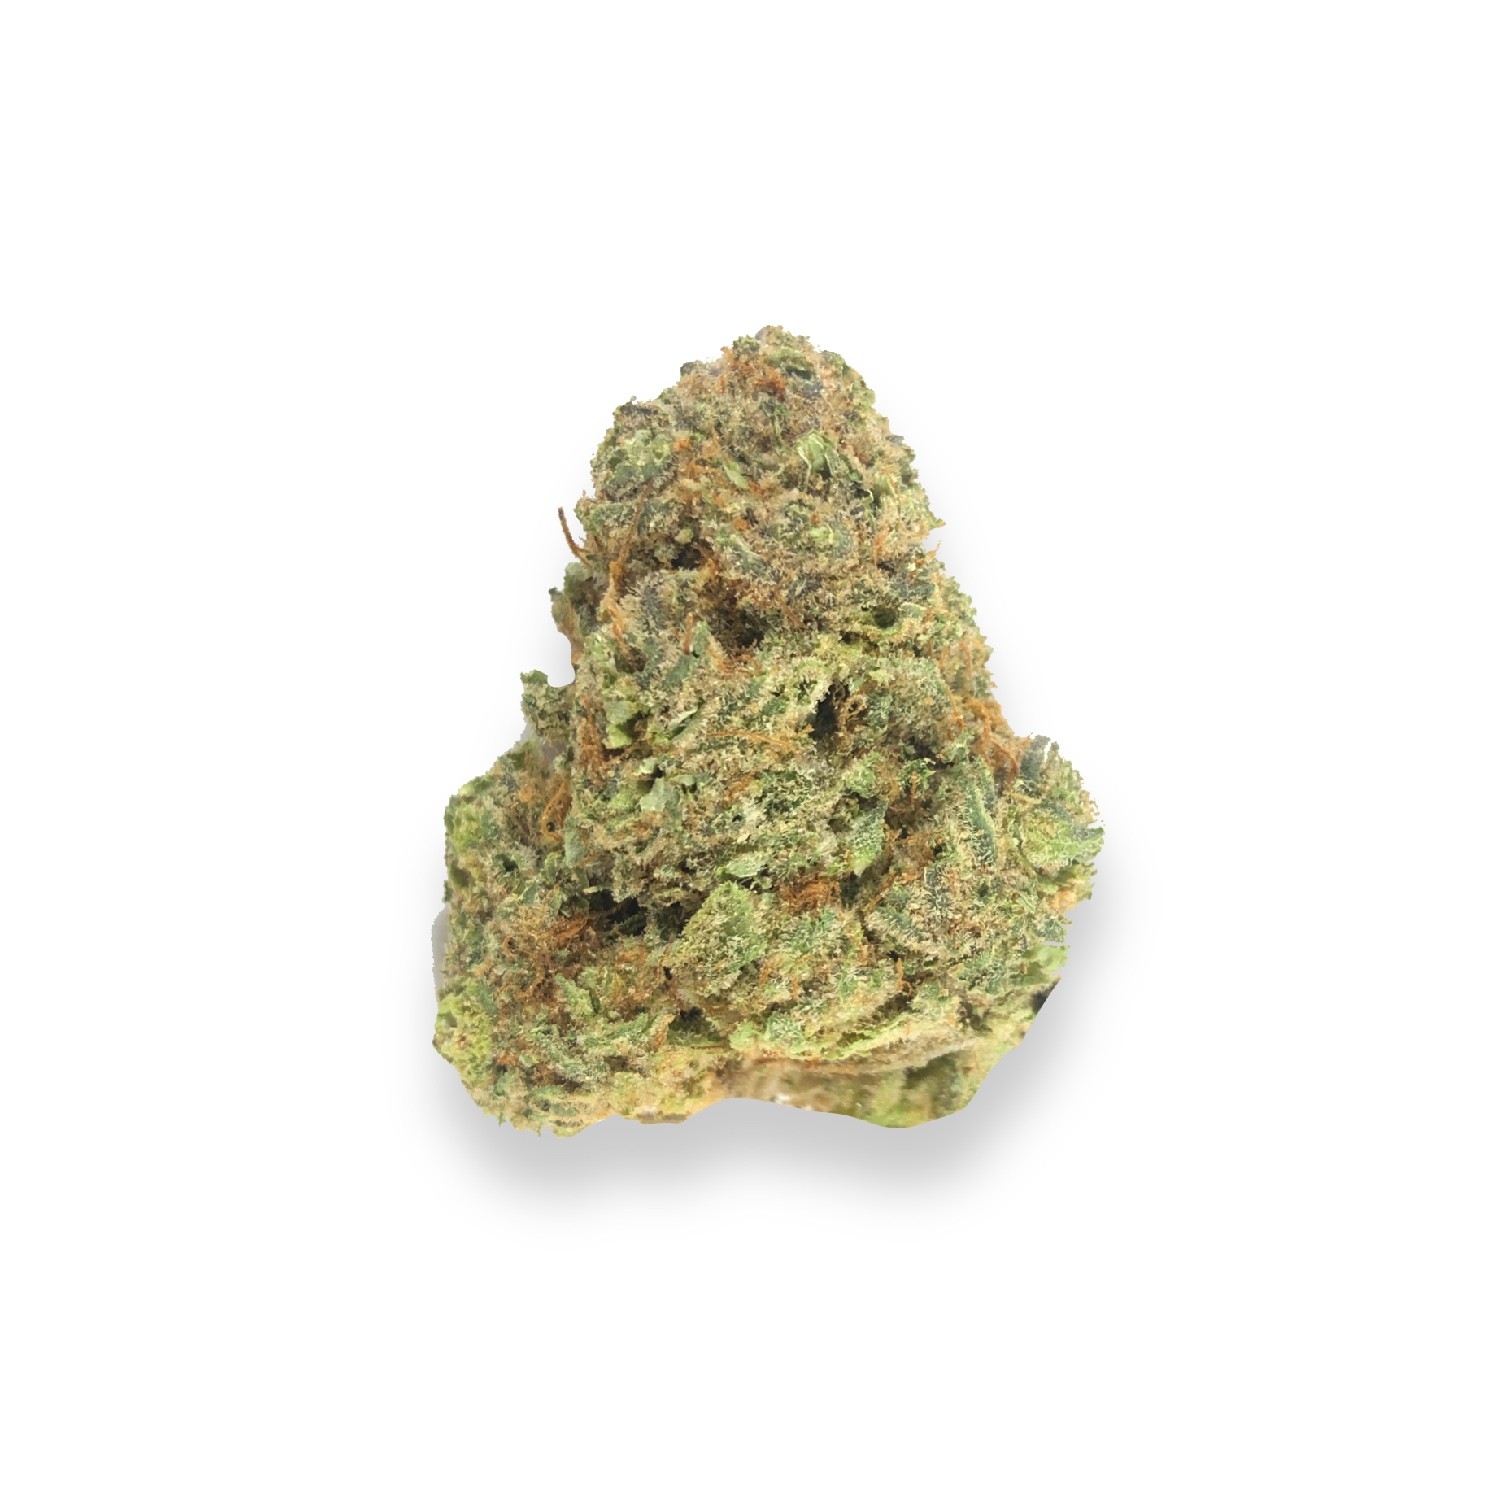 GG 5 Strain Review